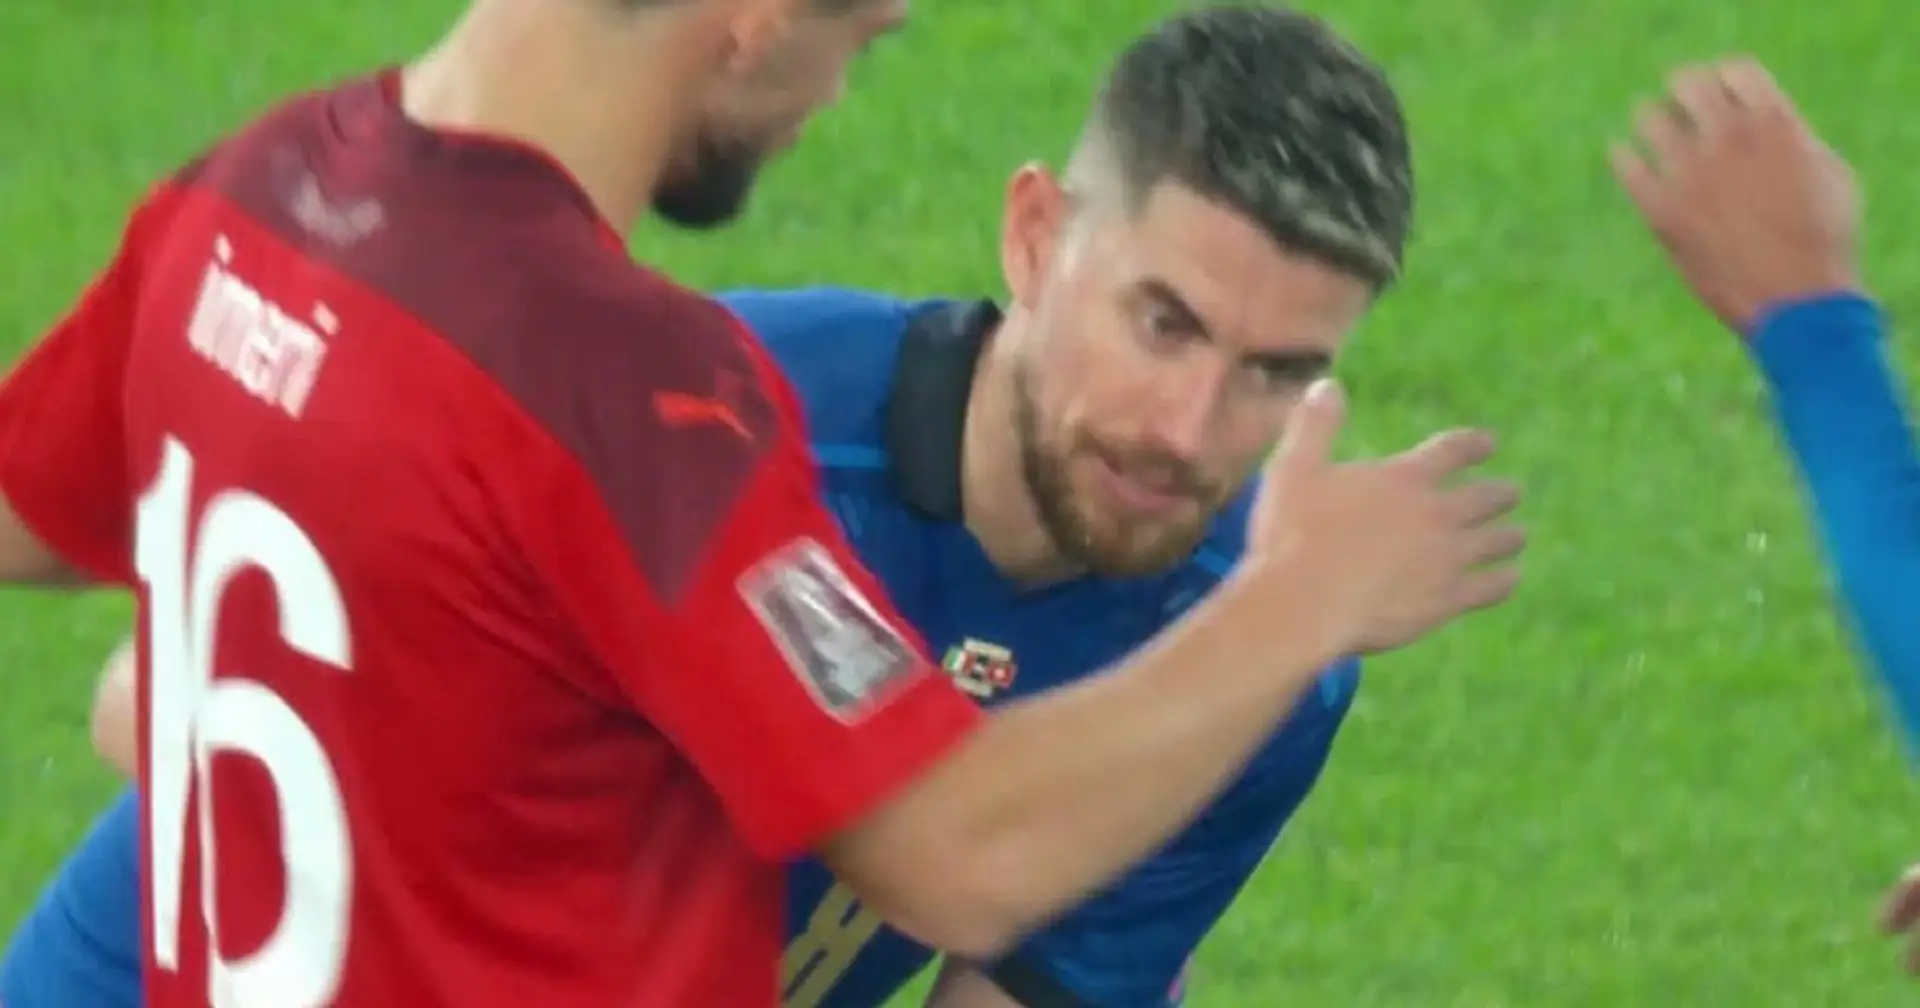 'Enough is enough': Jorginho told to stop taking penalties after fourth miss for Italy